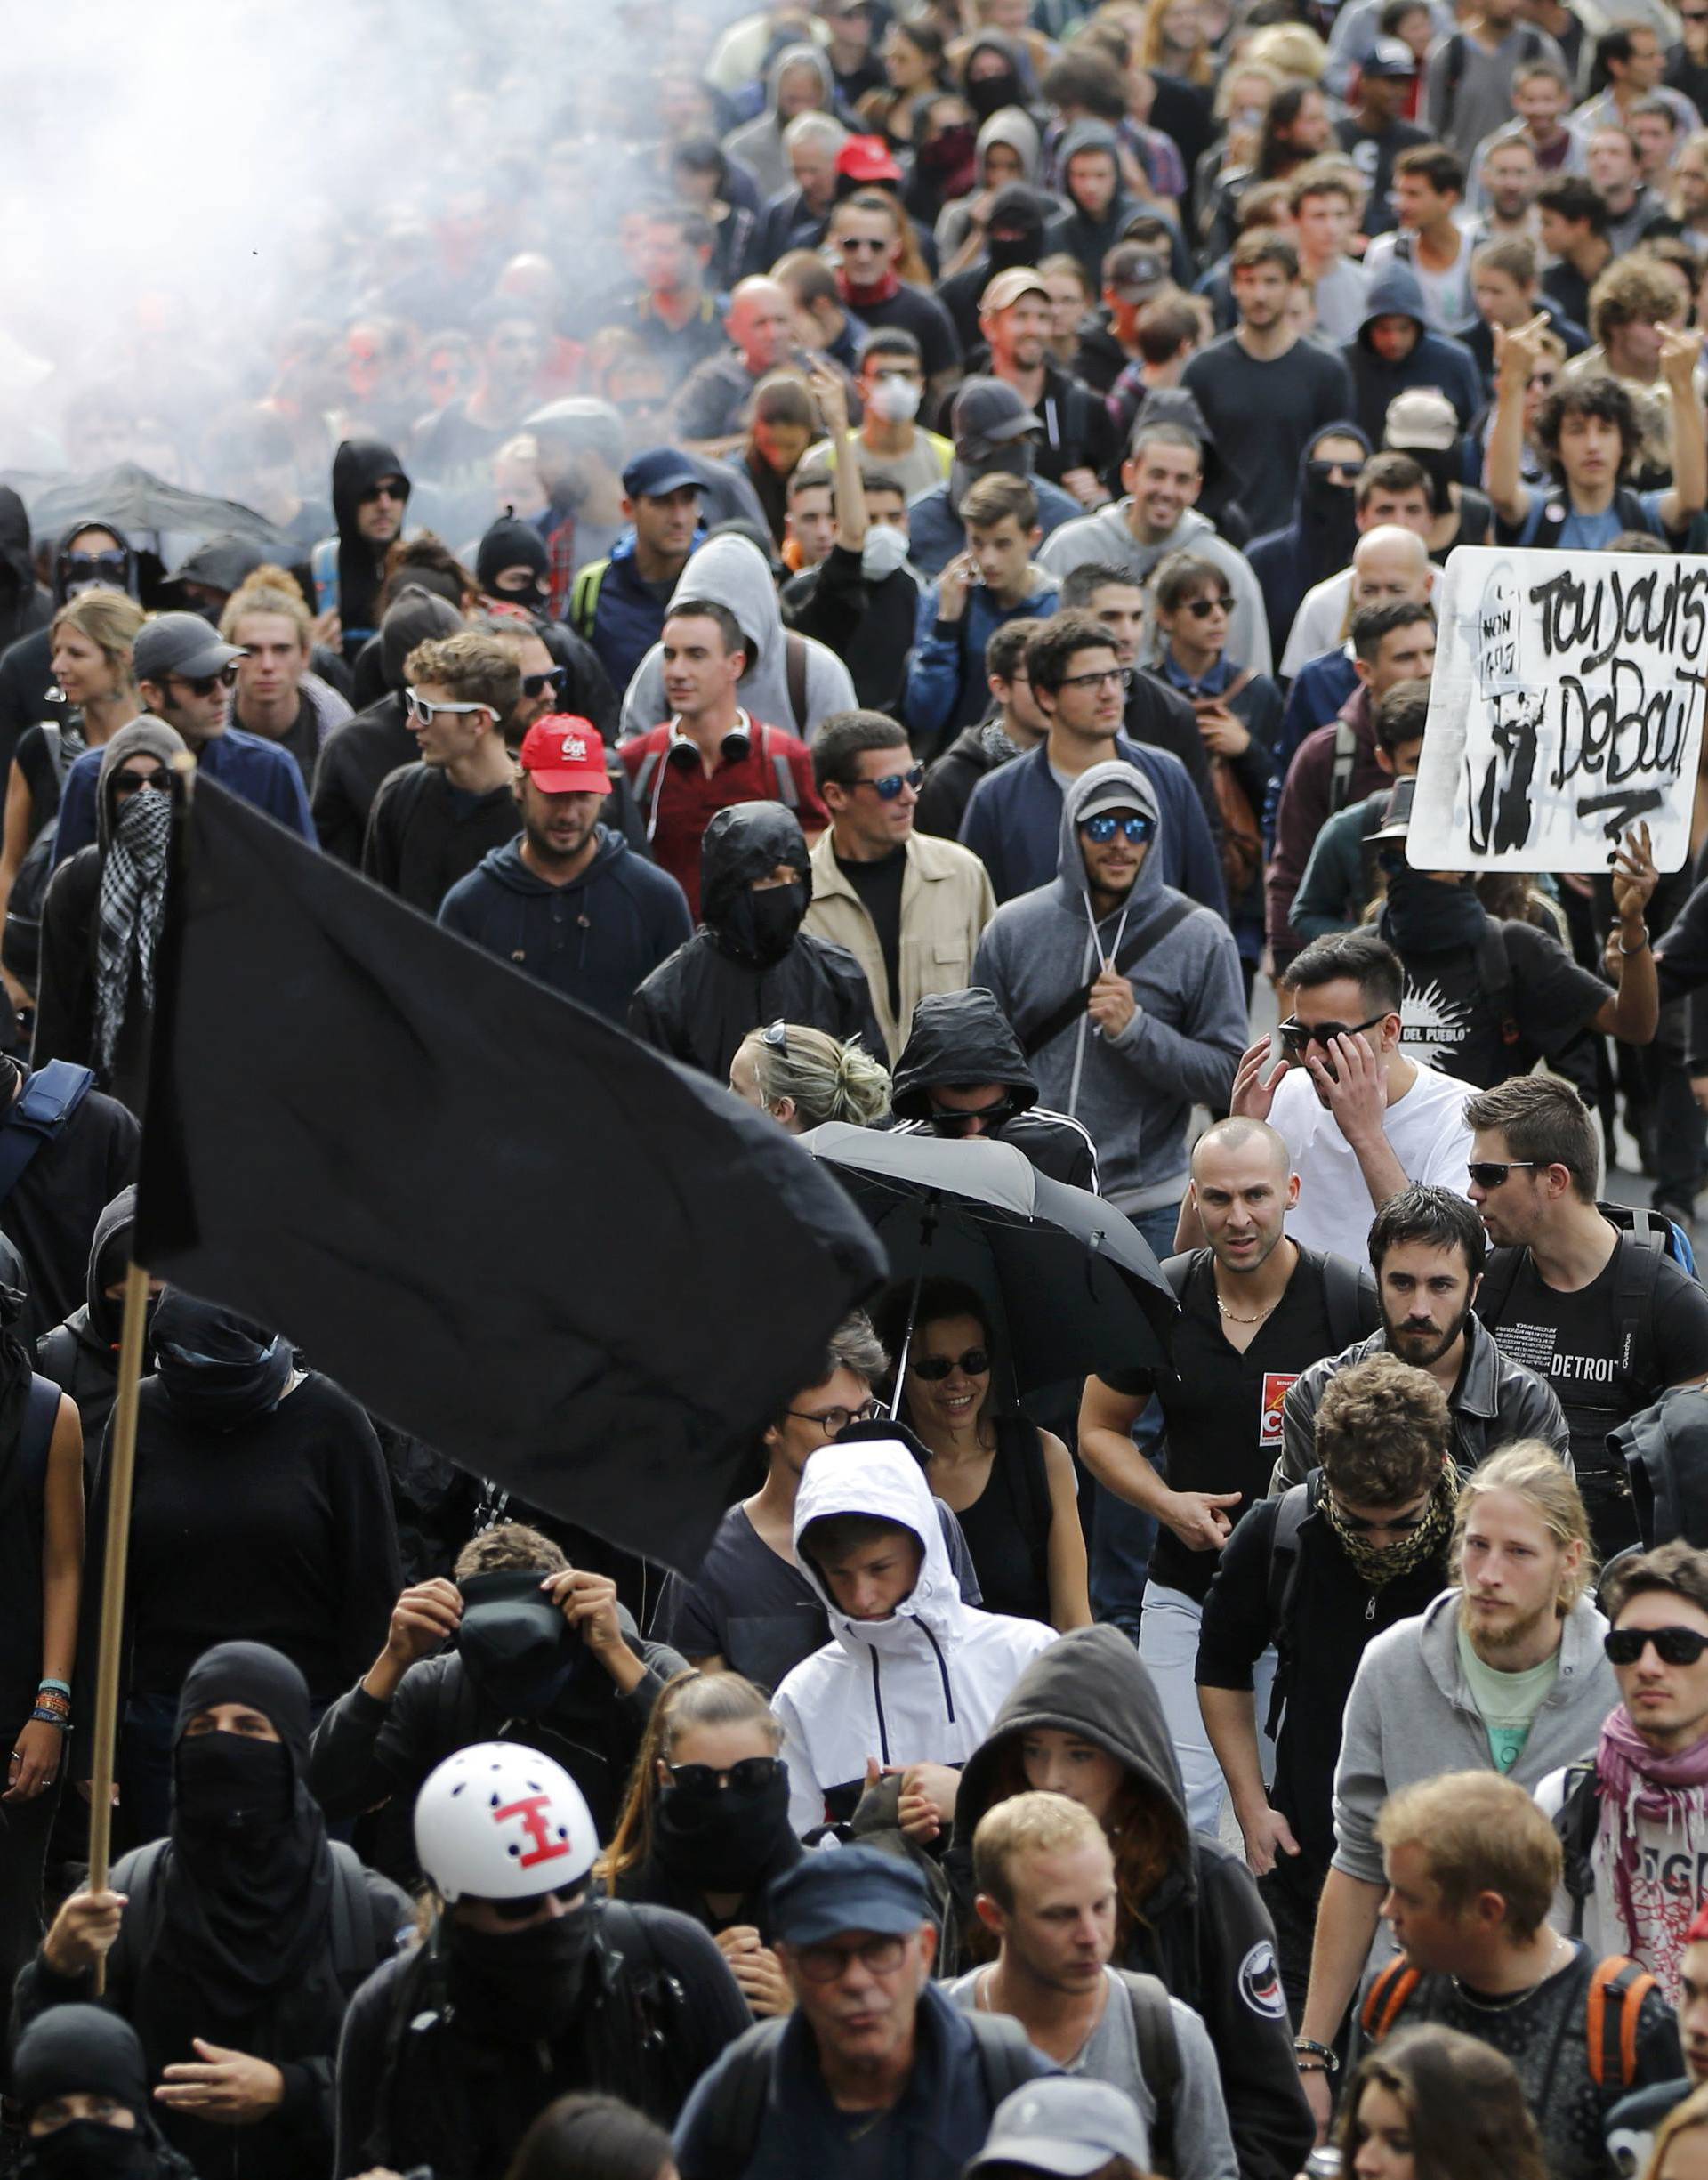 Protesters take part in a march in Nantes to demonstrate against the new French labour law